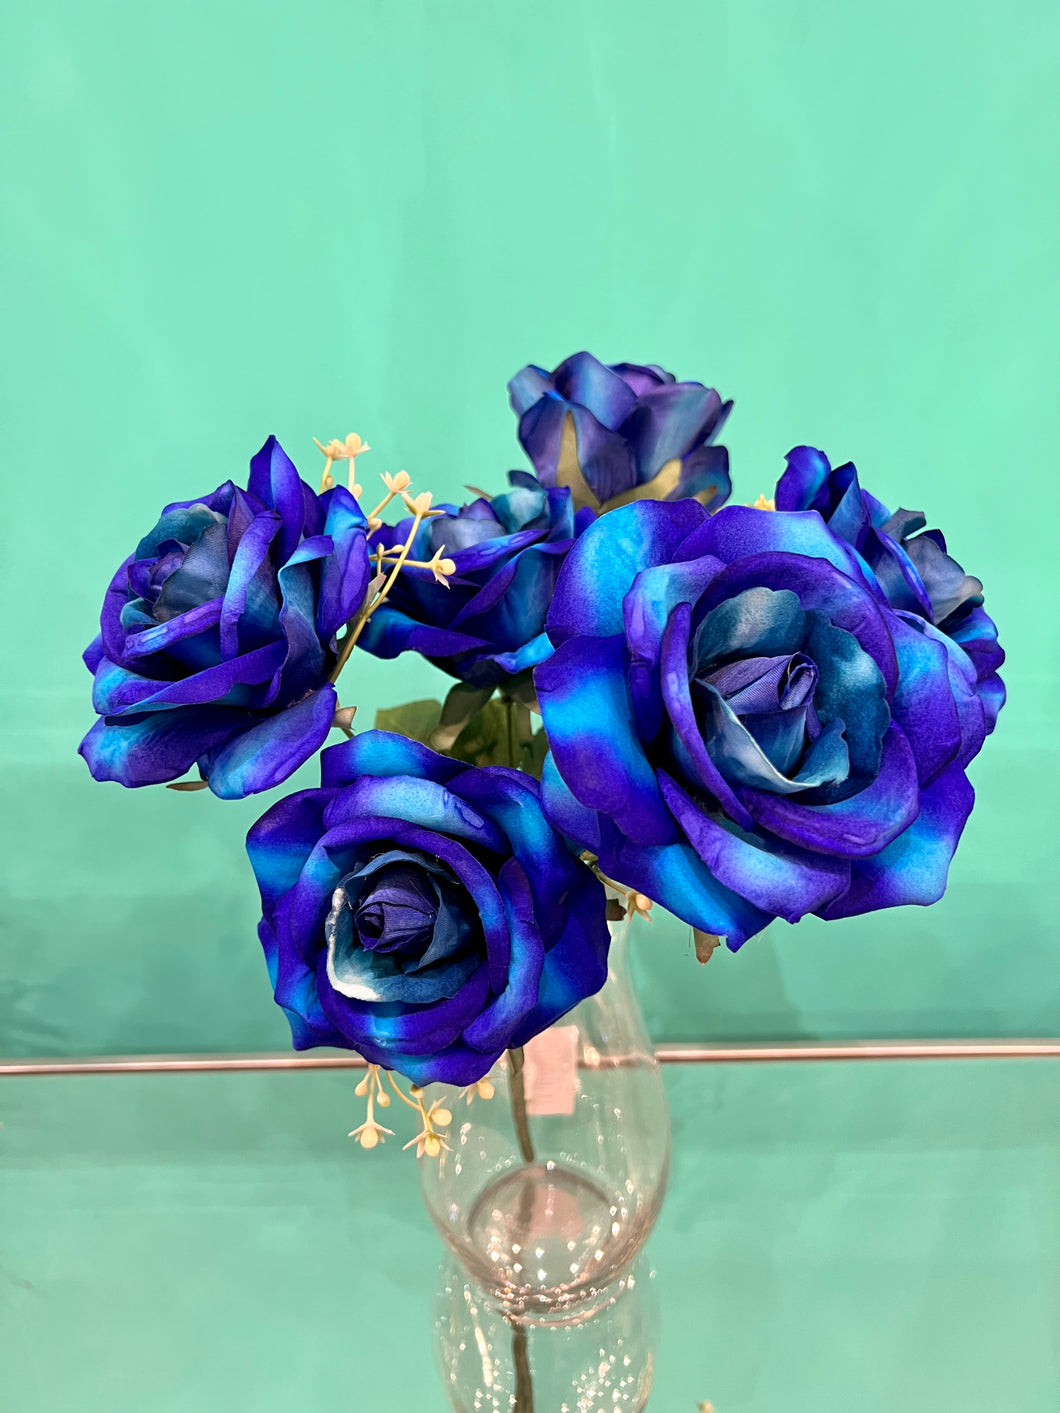 Bouquet of Velvet Flower Bunch in BLUE Colour With Stem